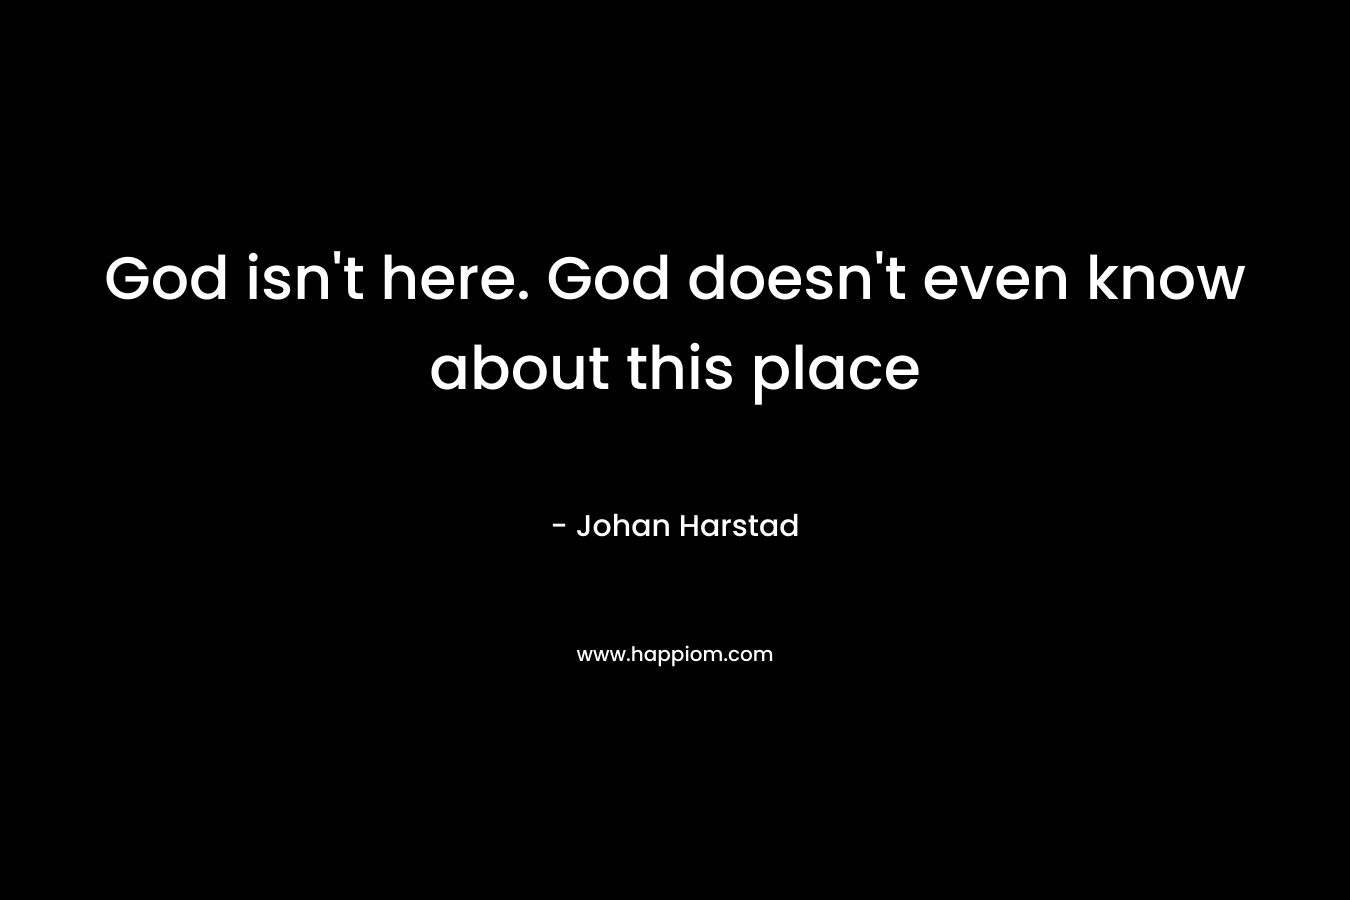 God isn't here. God doesn't even know about this place